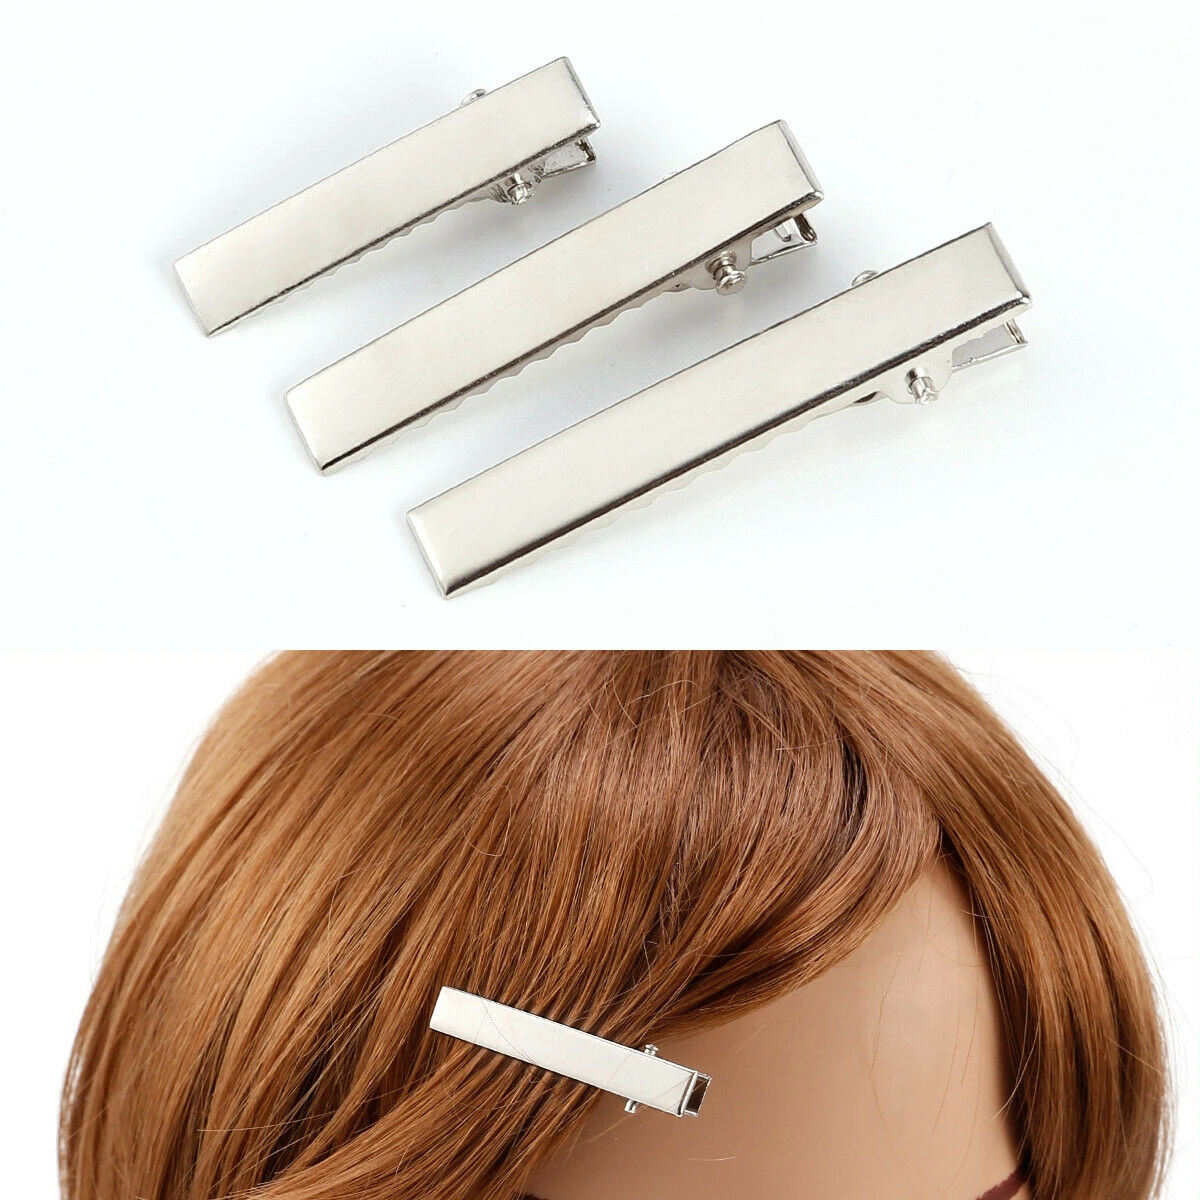 Bag of 100 Metal Spring Duckbill Alligator Rectangle Hair Clip For Decoration Pressing clip side clip hairpin Diy bow hair